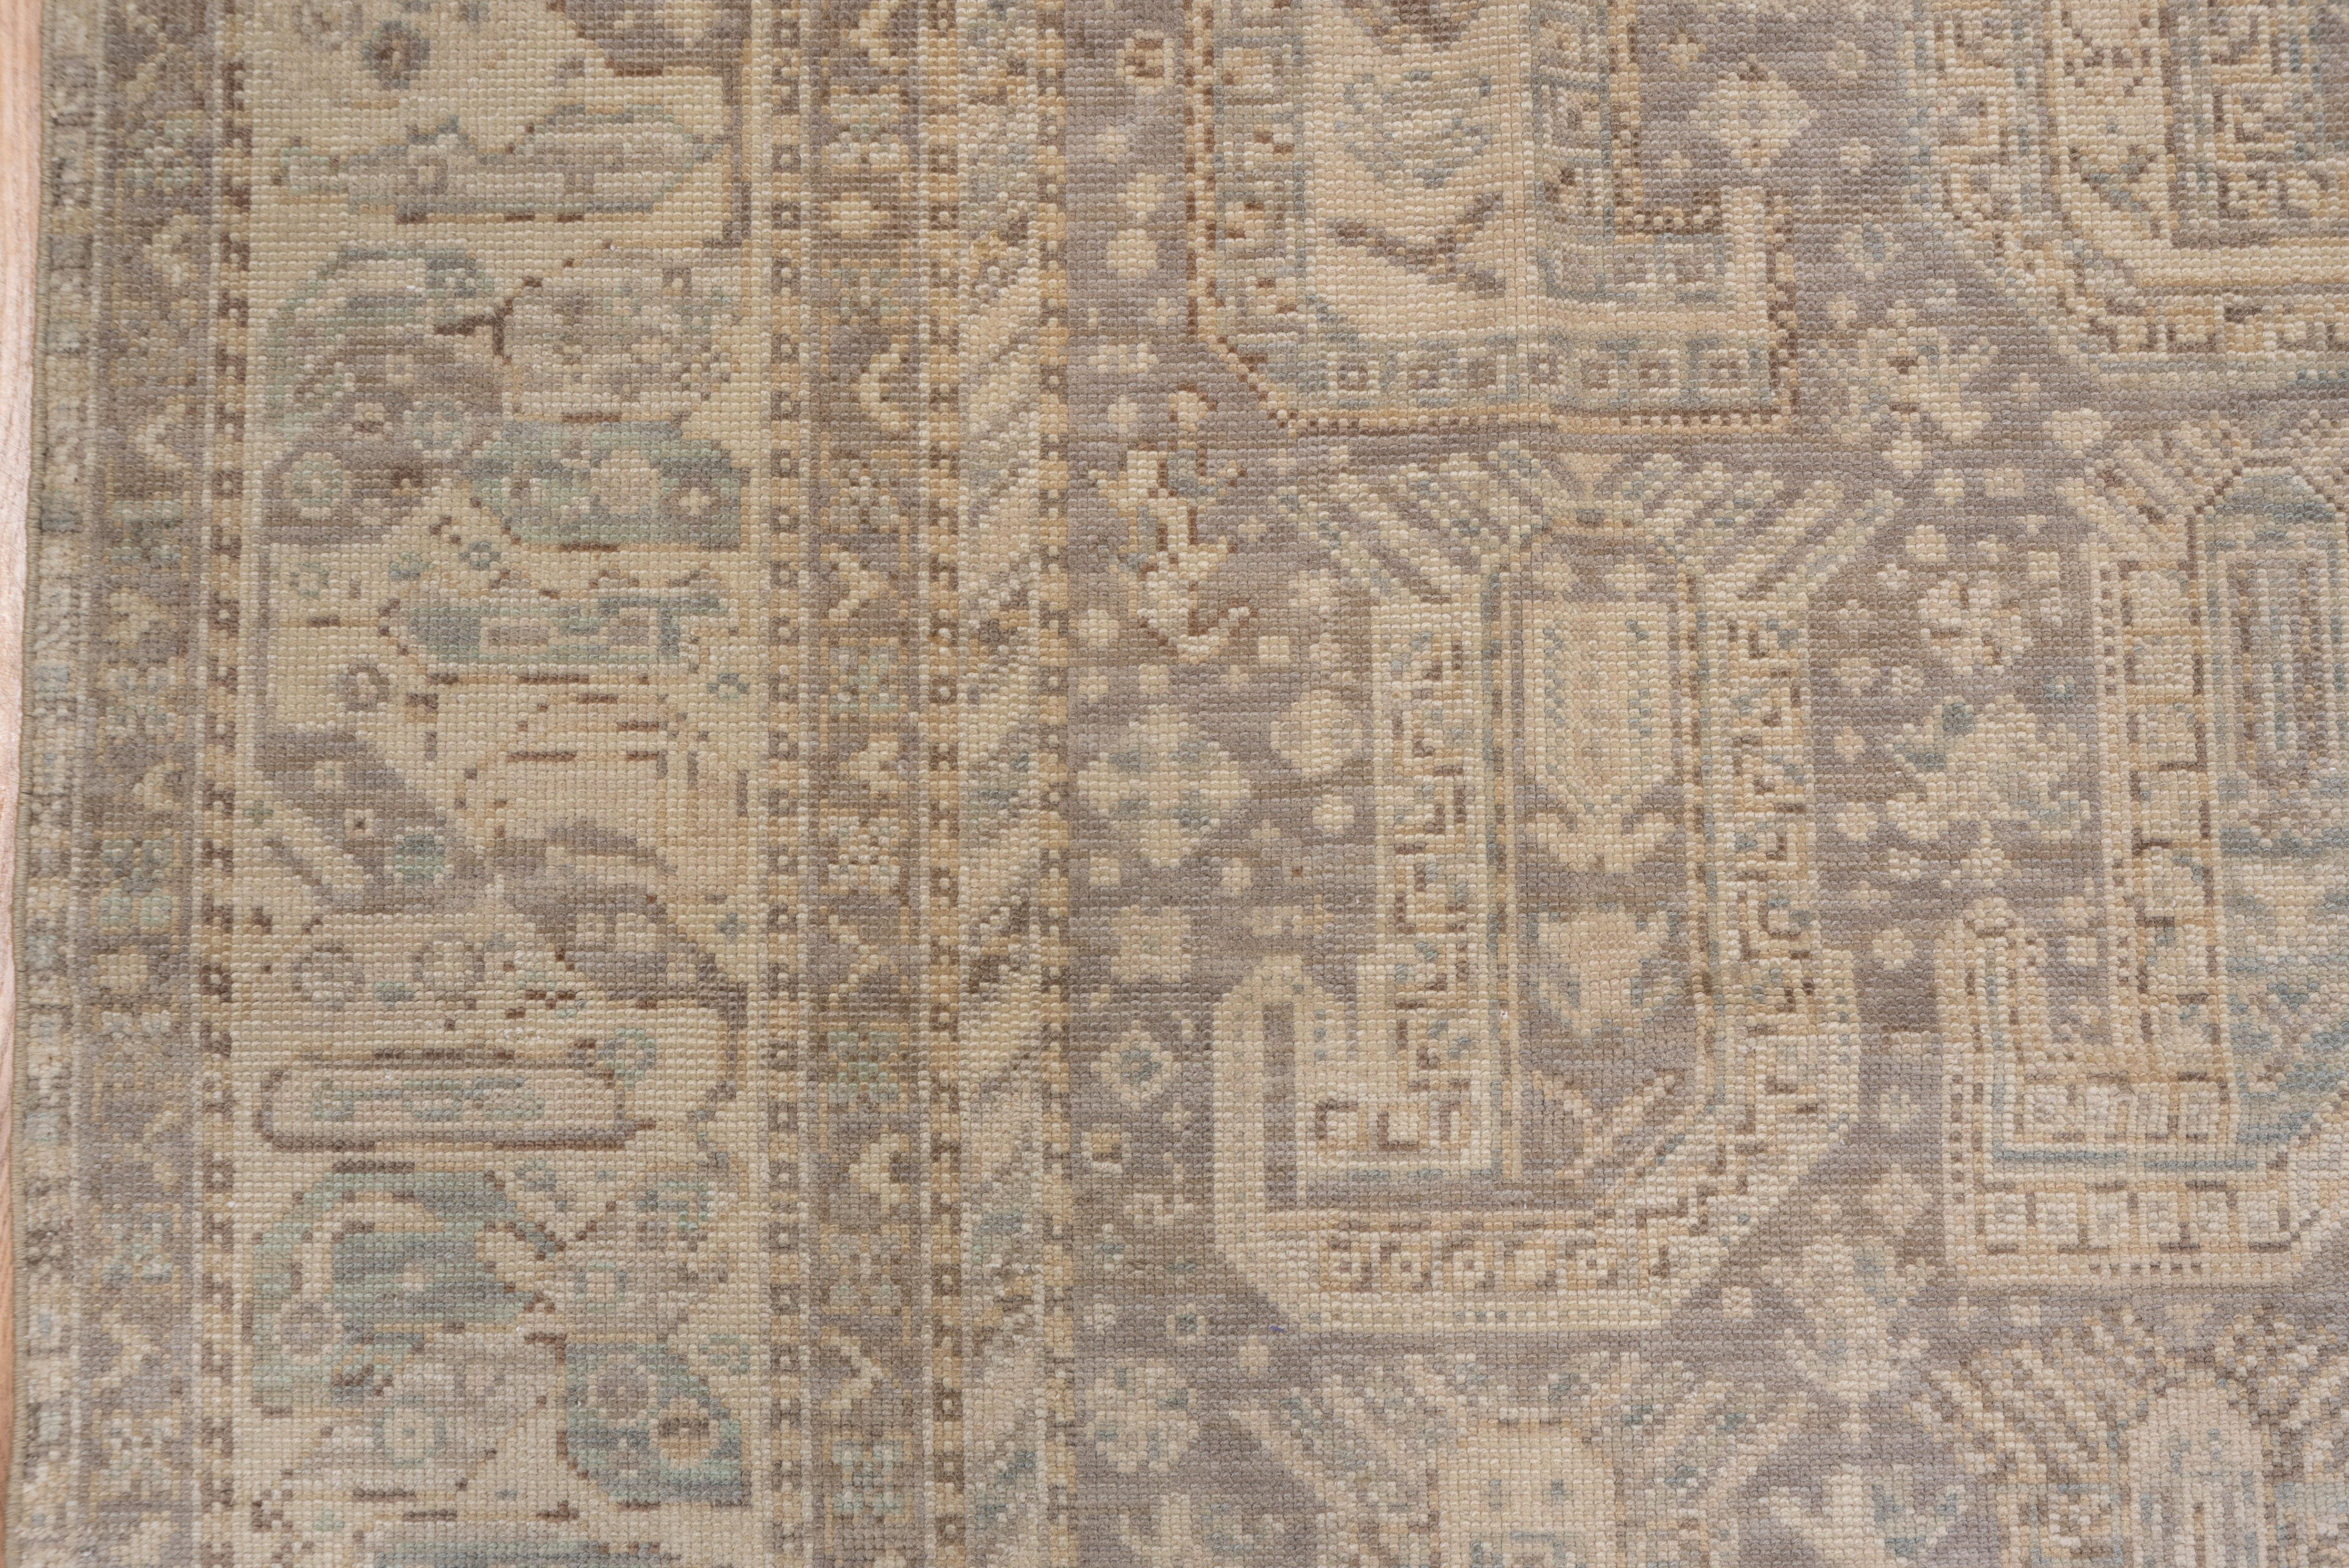 Neutral Antique Turkish Sivas Rug, Light Gray Field, Paisley All-Over Design In Good Condition For Sale In New York, NY